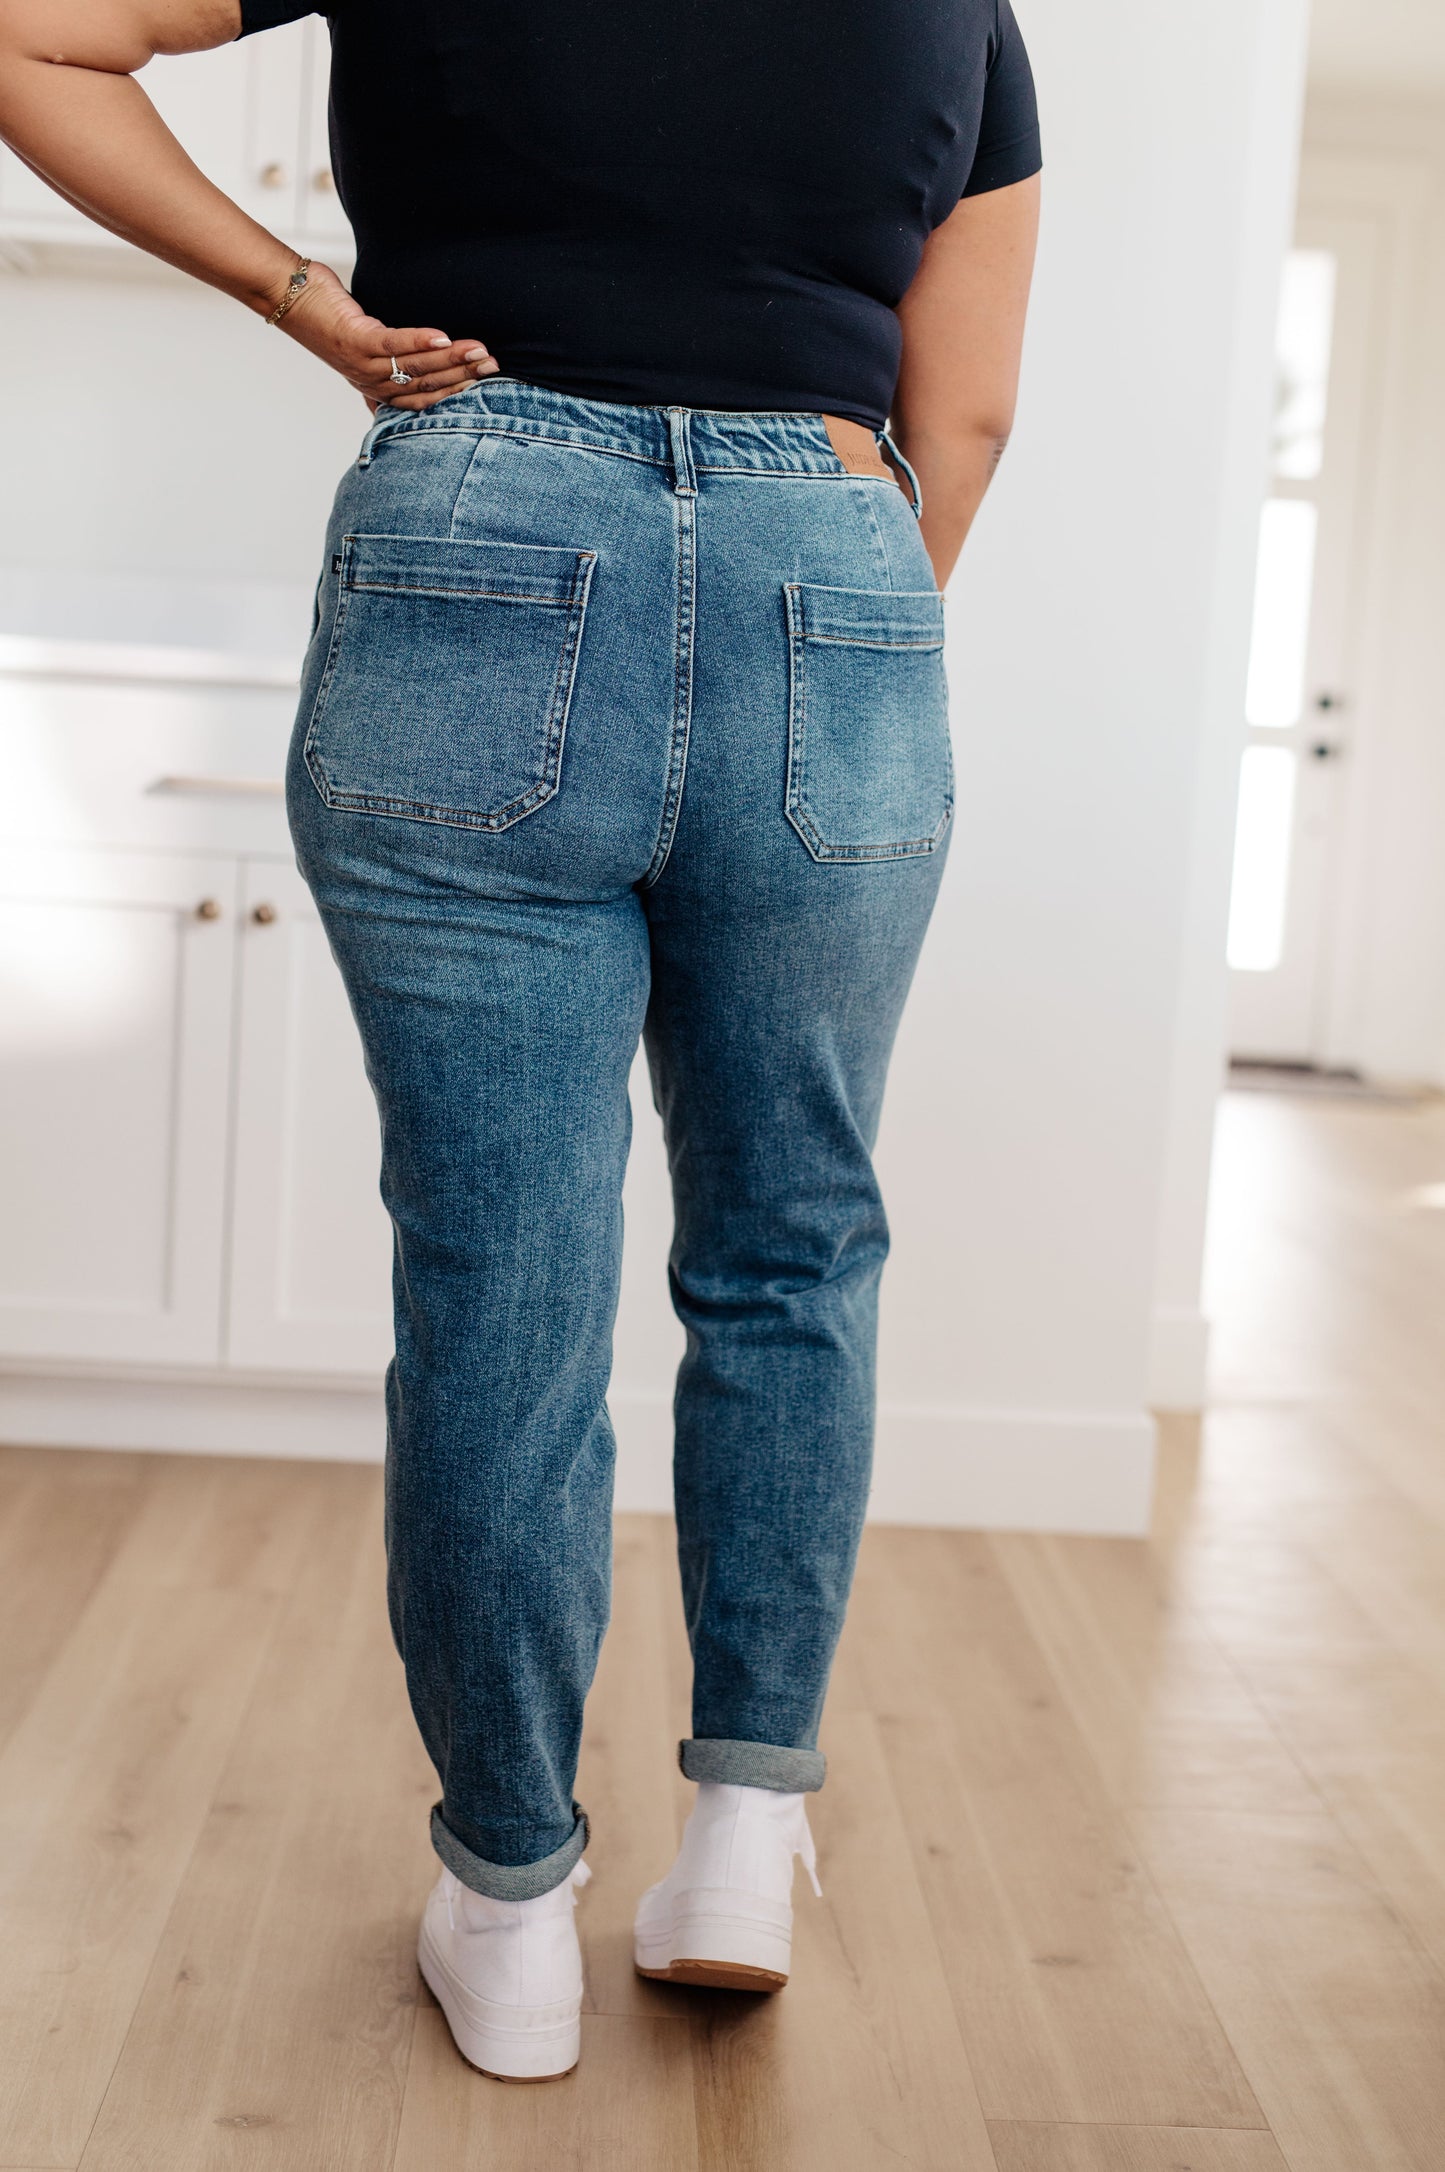 Experience the perfect fit and style in the Payton Pull-On Denim Joggers from Judy Blue! Made with a high rise and zero distressing, these medium-wash joggers offer an elastic waistband, functional drawstring, and patch pockets for a comfortable, adjustable fit. With an optional rolled cuff, you'll look and feel effortlessly chic. Are you ready to feel confident and stylish? Try Payton Pull-On Denim Joggers today! 0 -24W